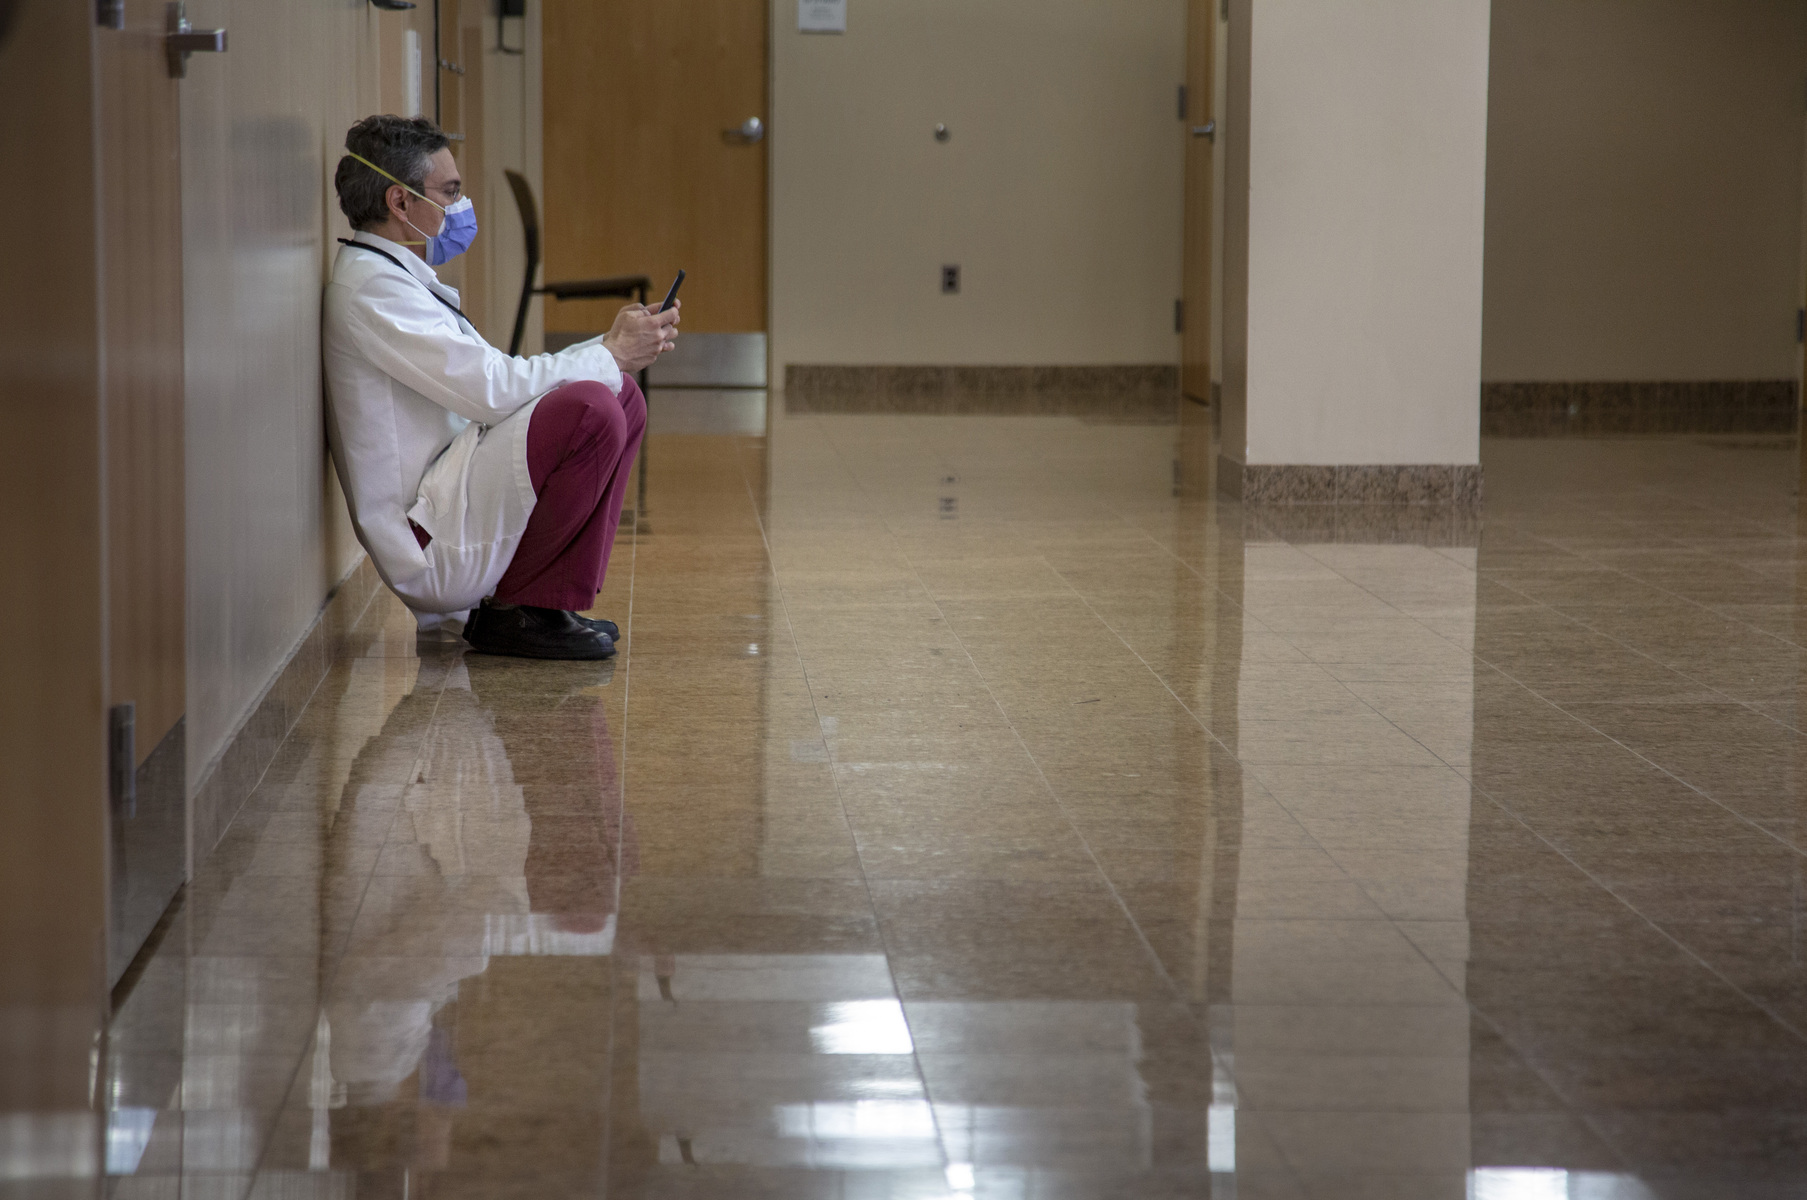 A tired healthcare worker takes a break in a hallway at Holy Name Medical Center during the COVID-19 pandemic4/15 2020 Photo by Jeff Rhode.